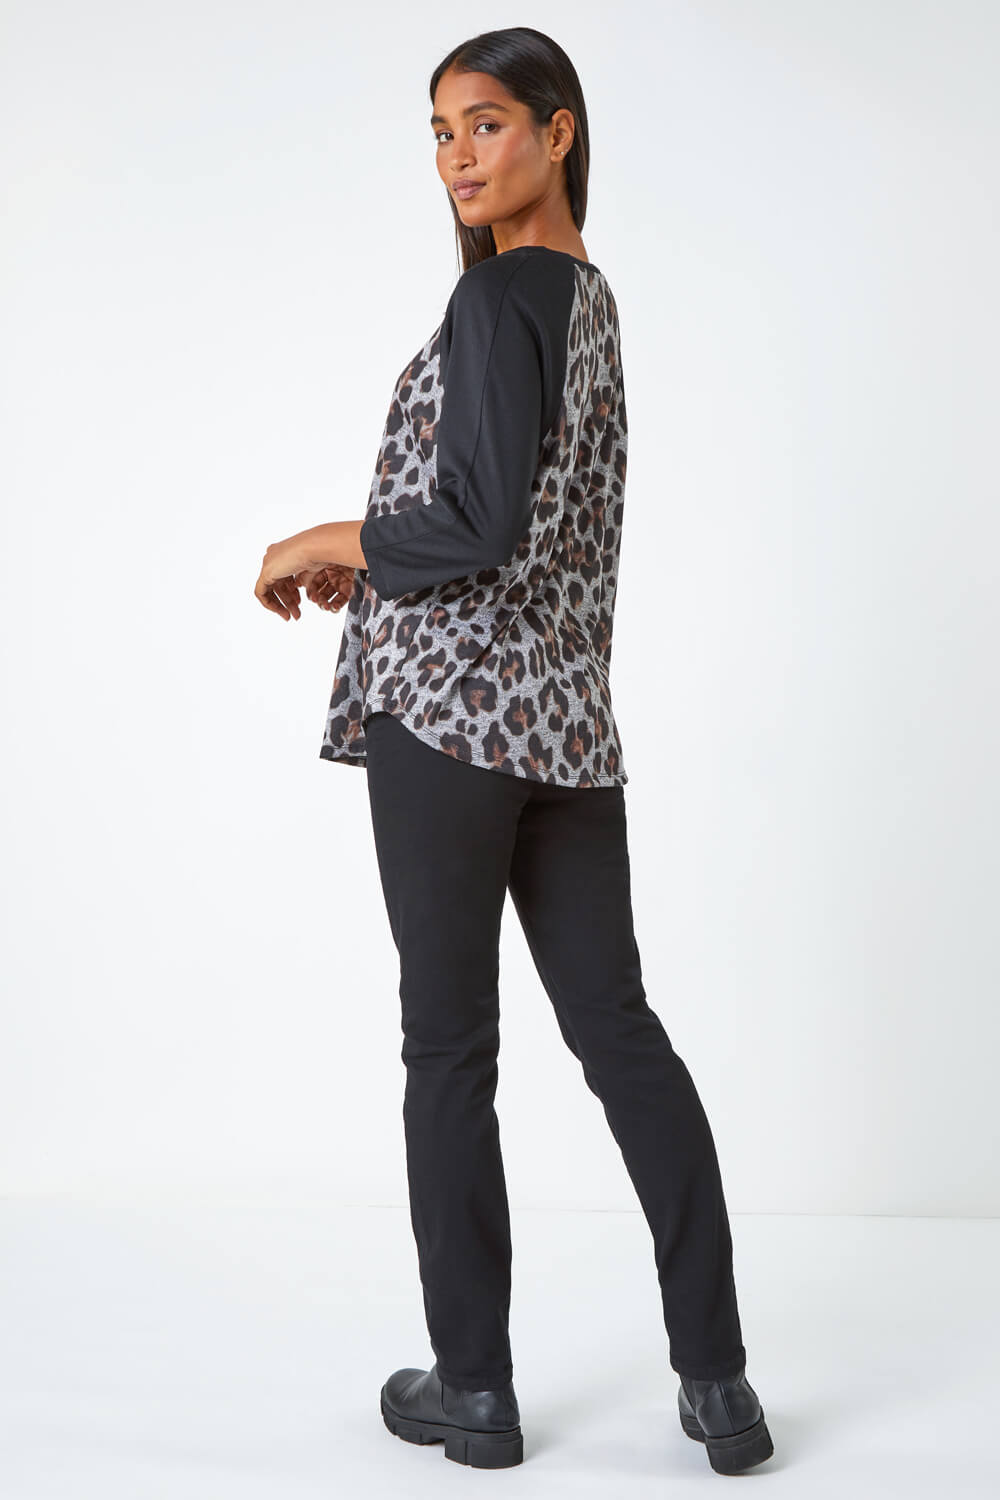 Natural  Animal Print Stretch Top, Image 3 of 5